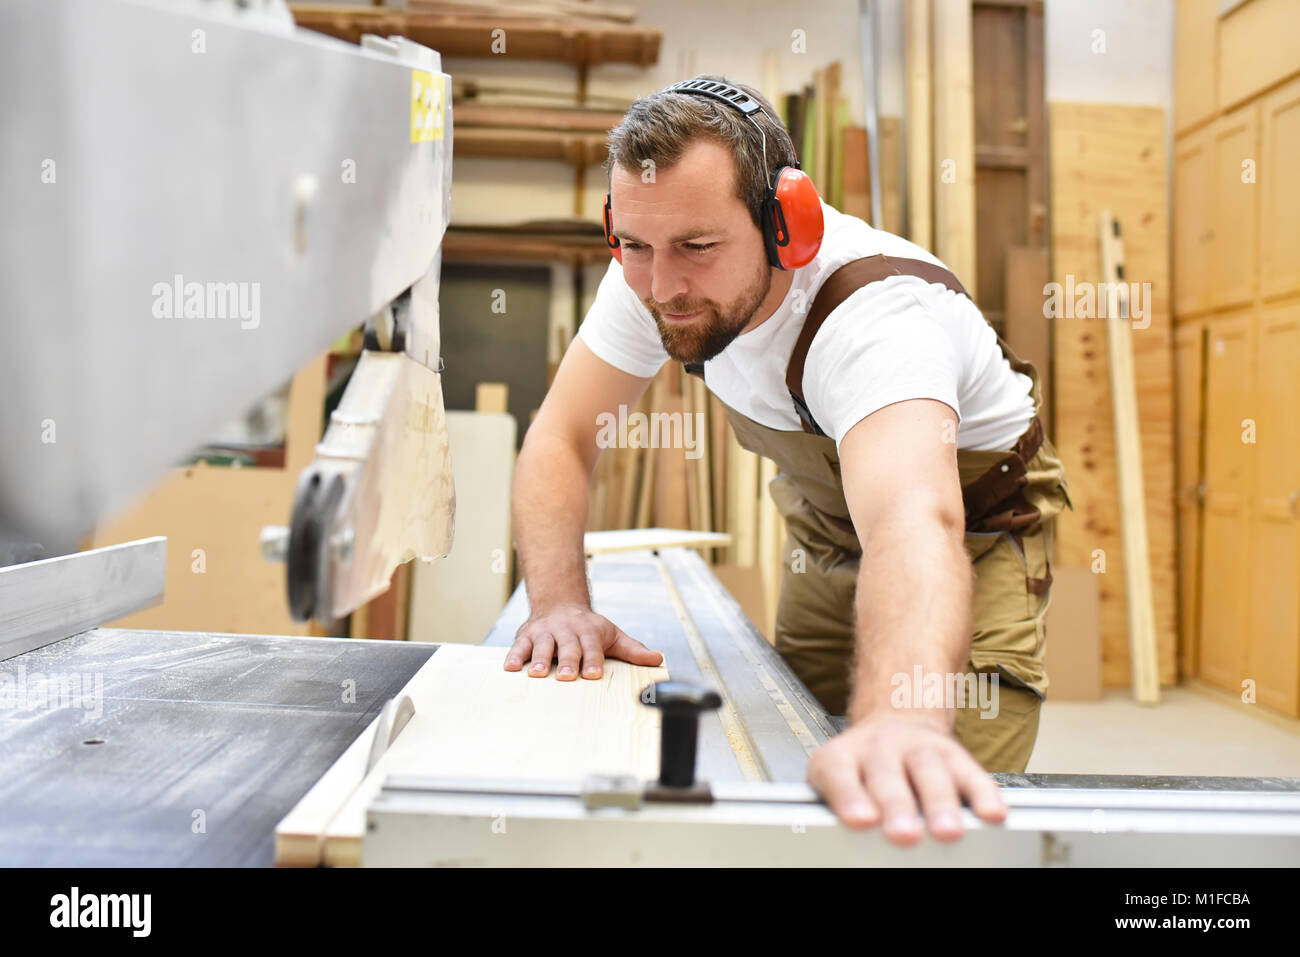 friendly carpenter with ear protectors and working clothes working on a saw in the workshop Stock Photo